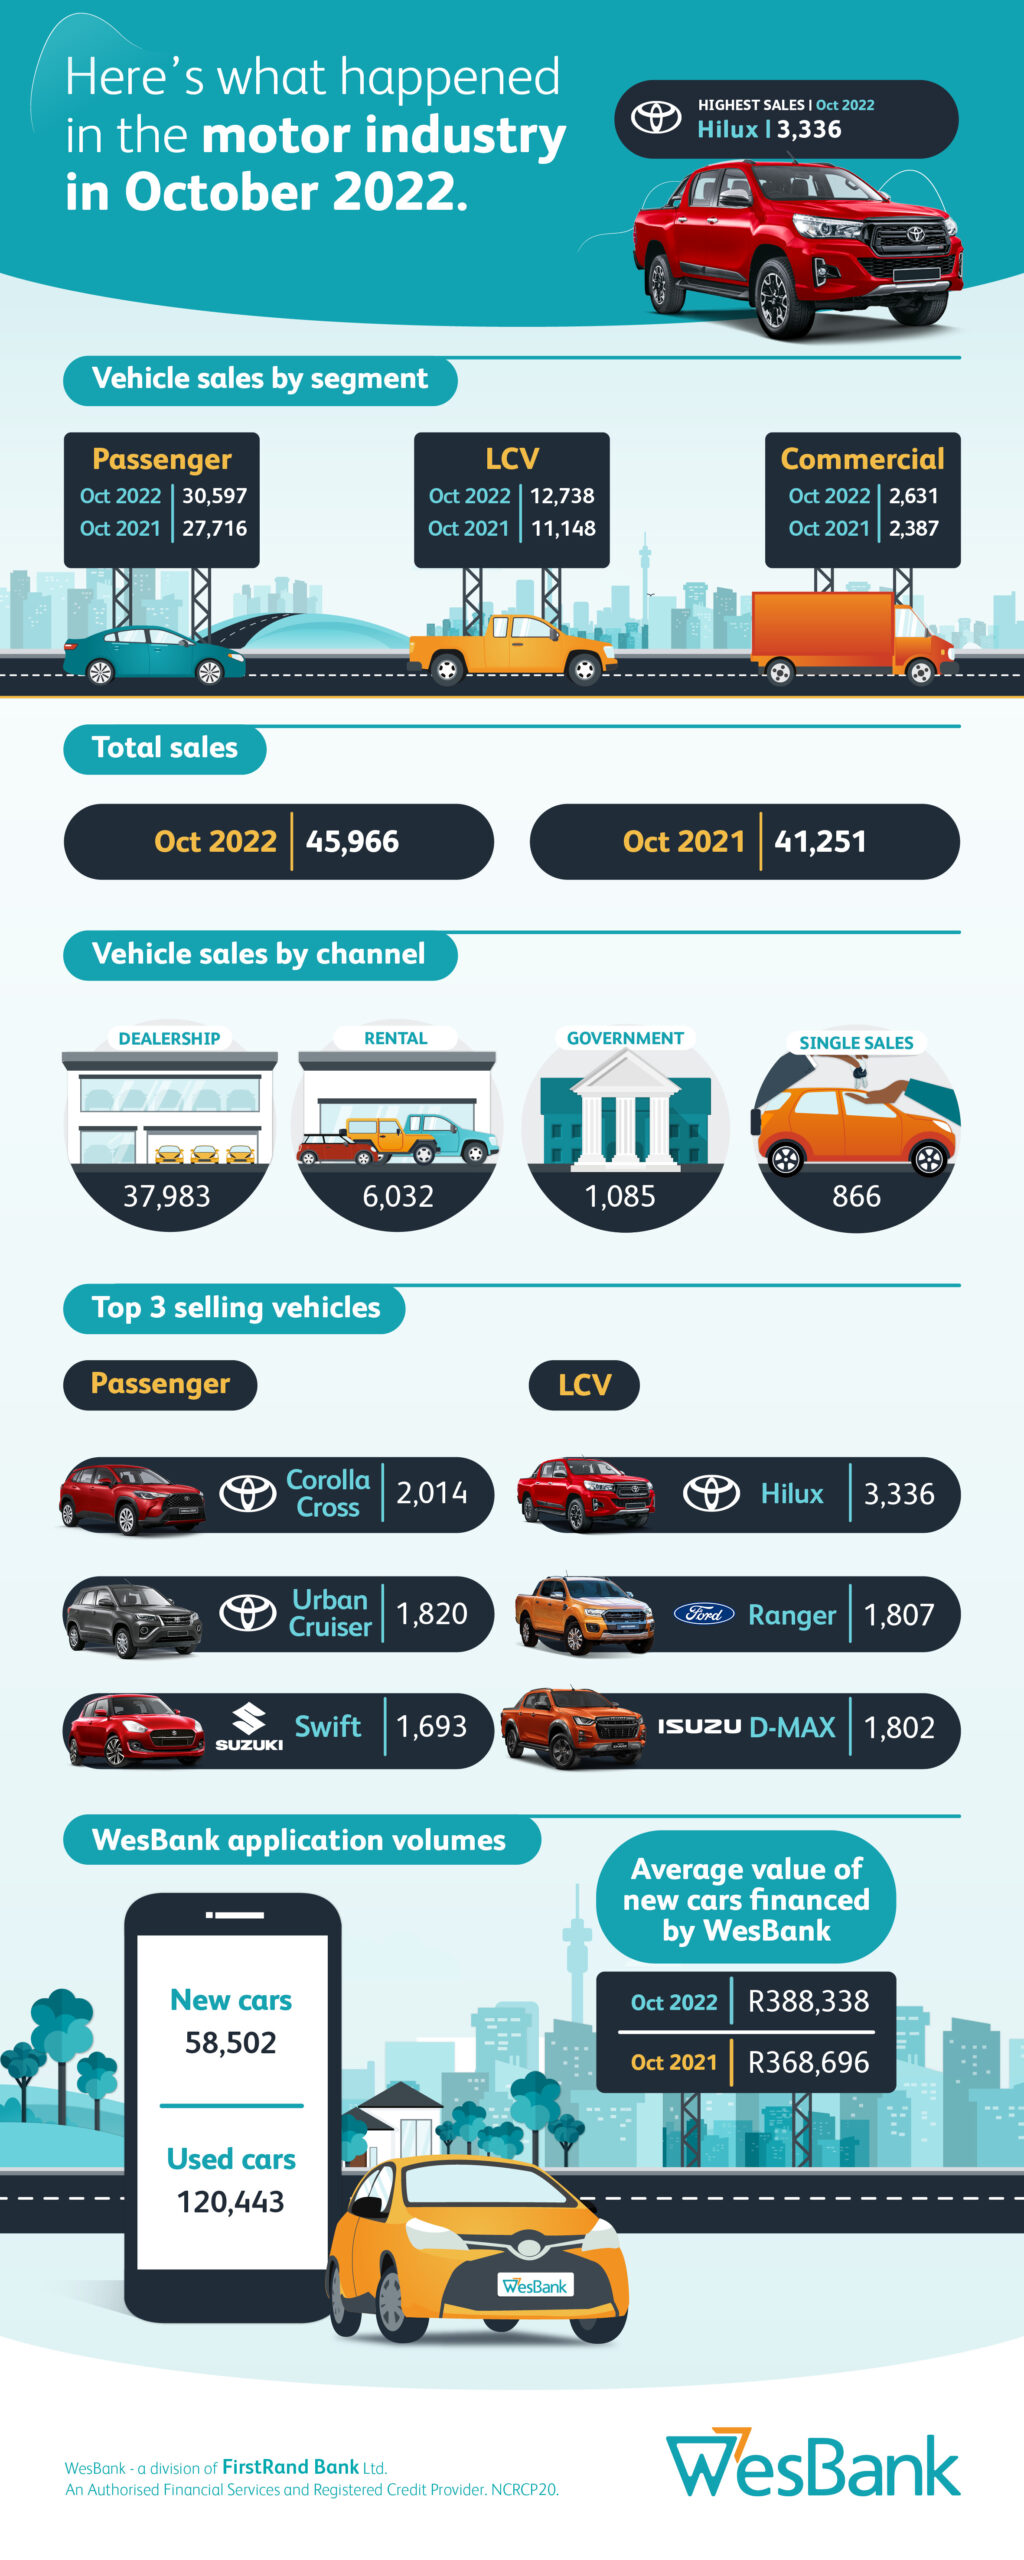 New vehicle sales need perspective